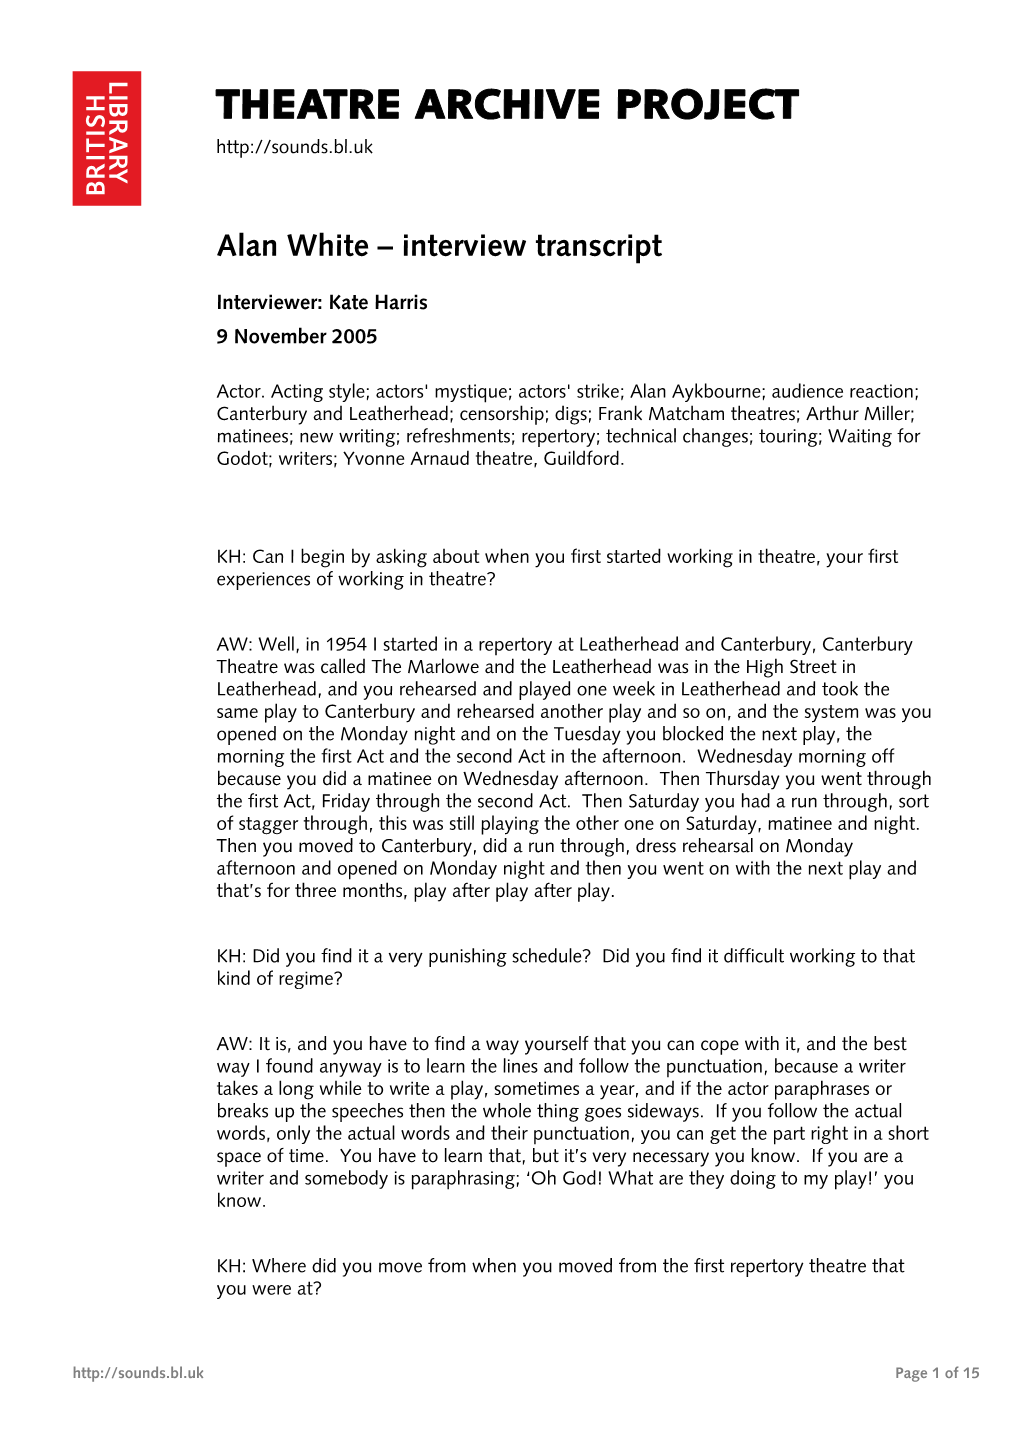 Theatre Archive Project: Interview with Alan White